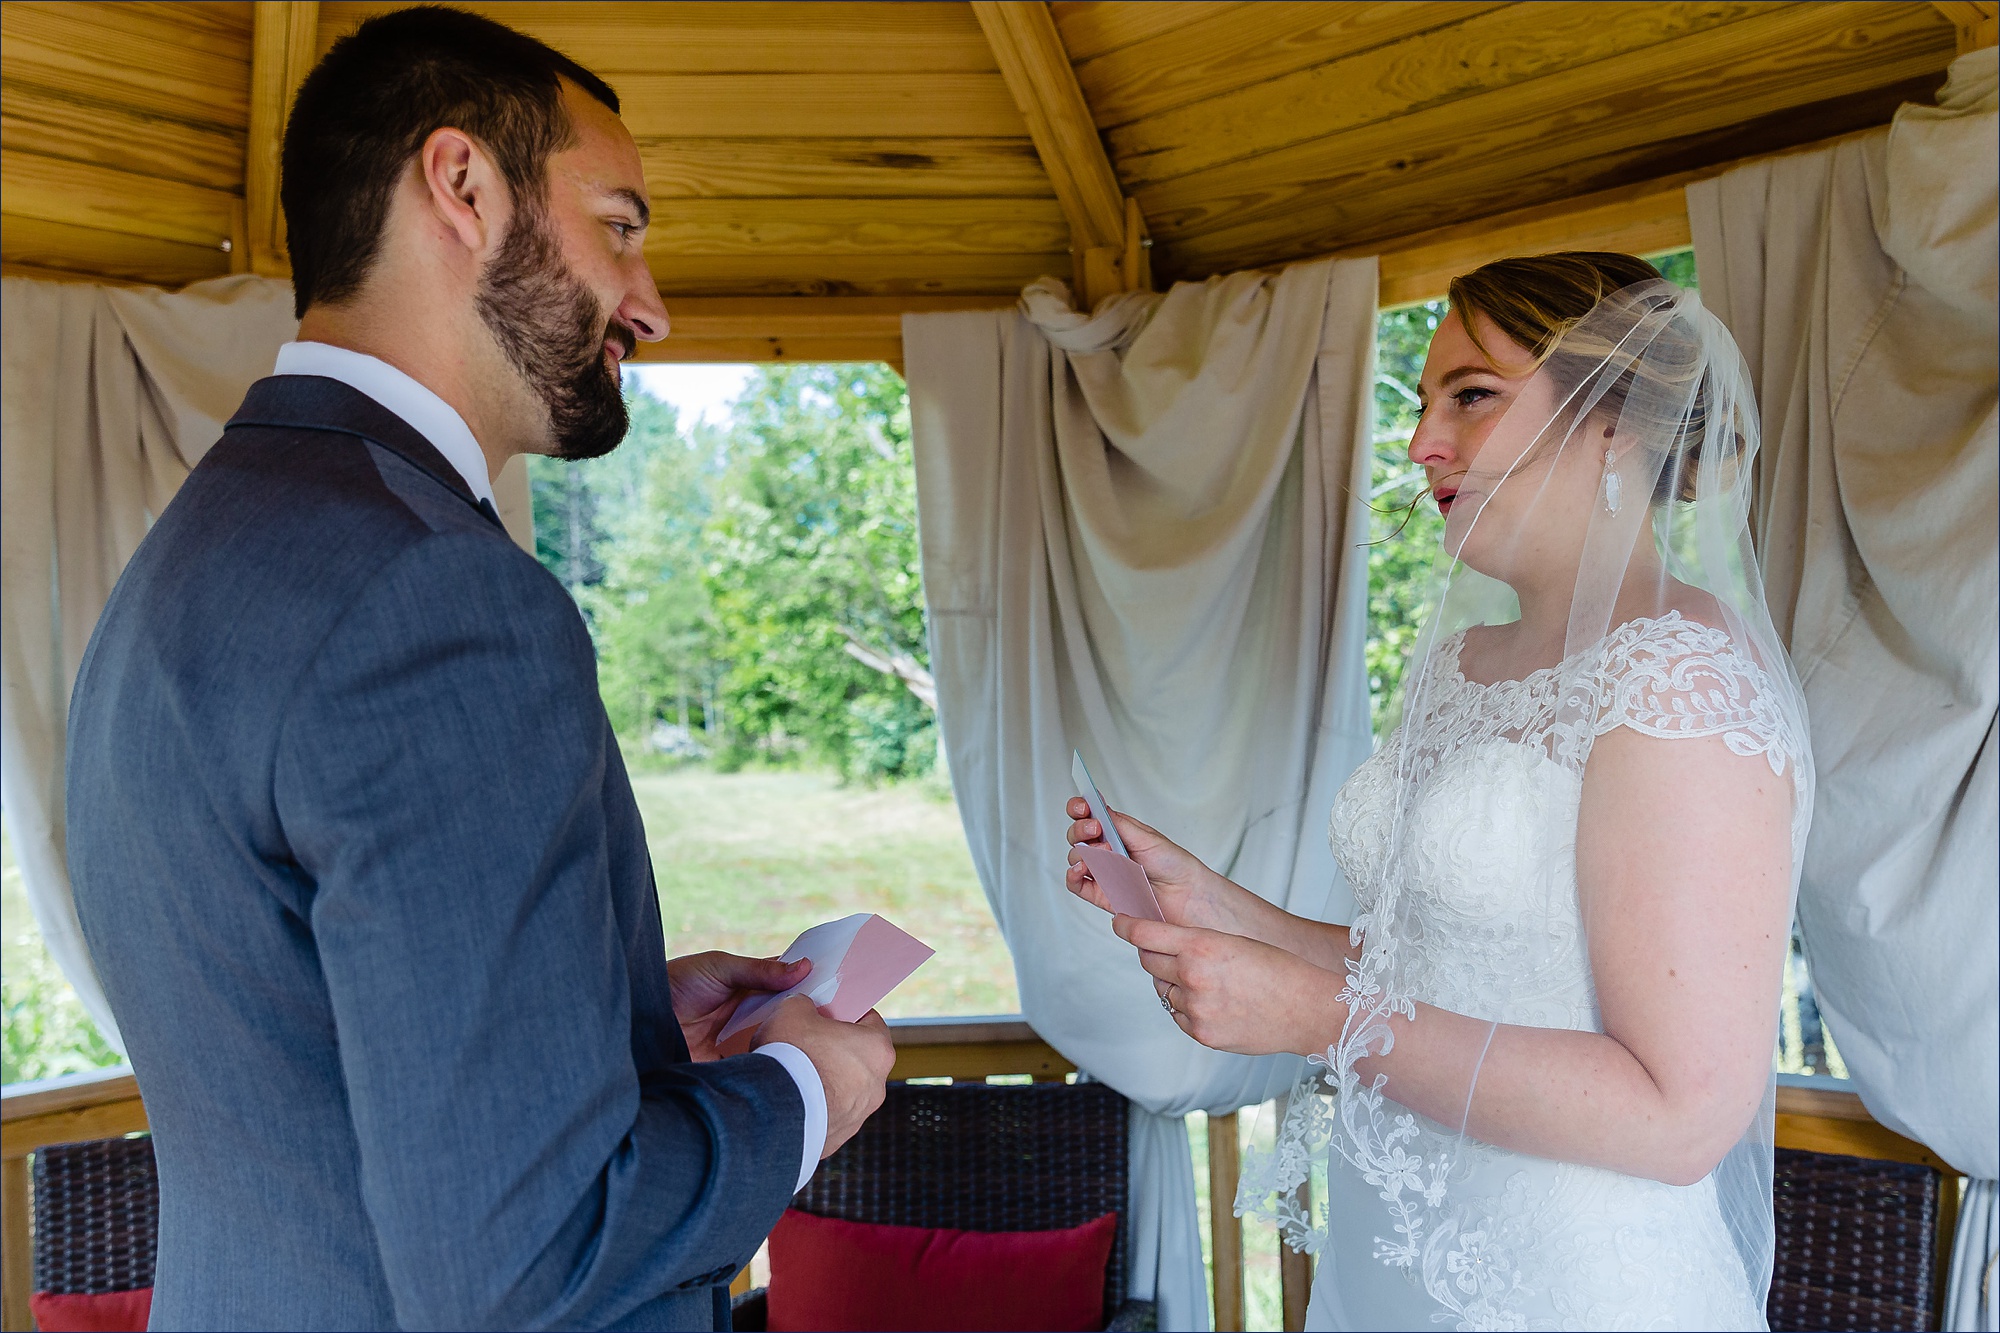 The bride and groom tear up after sharing cards with one another after the first look